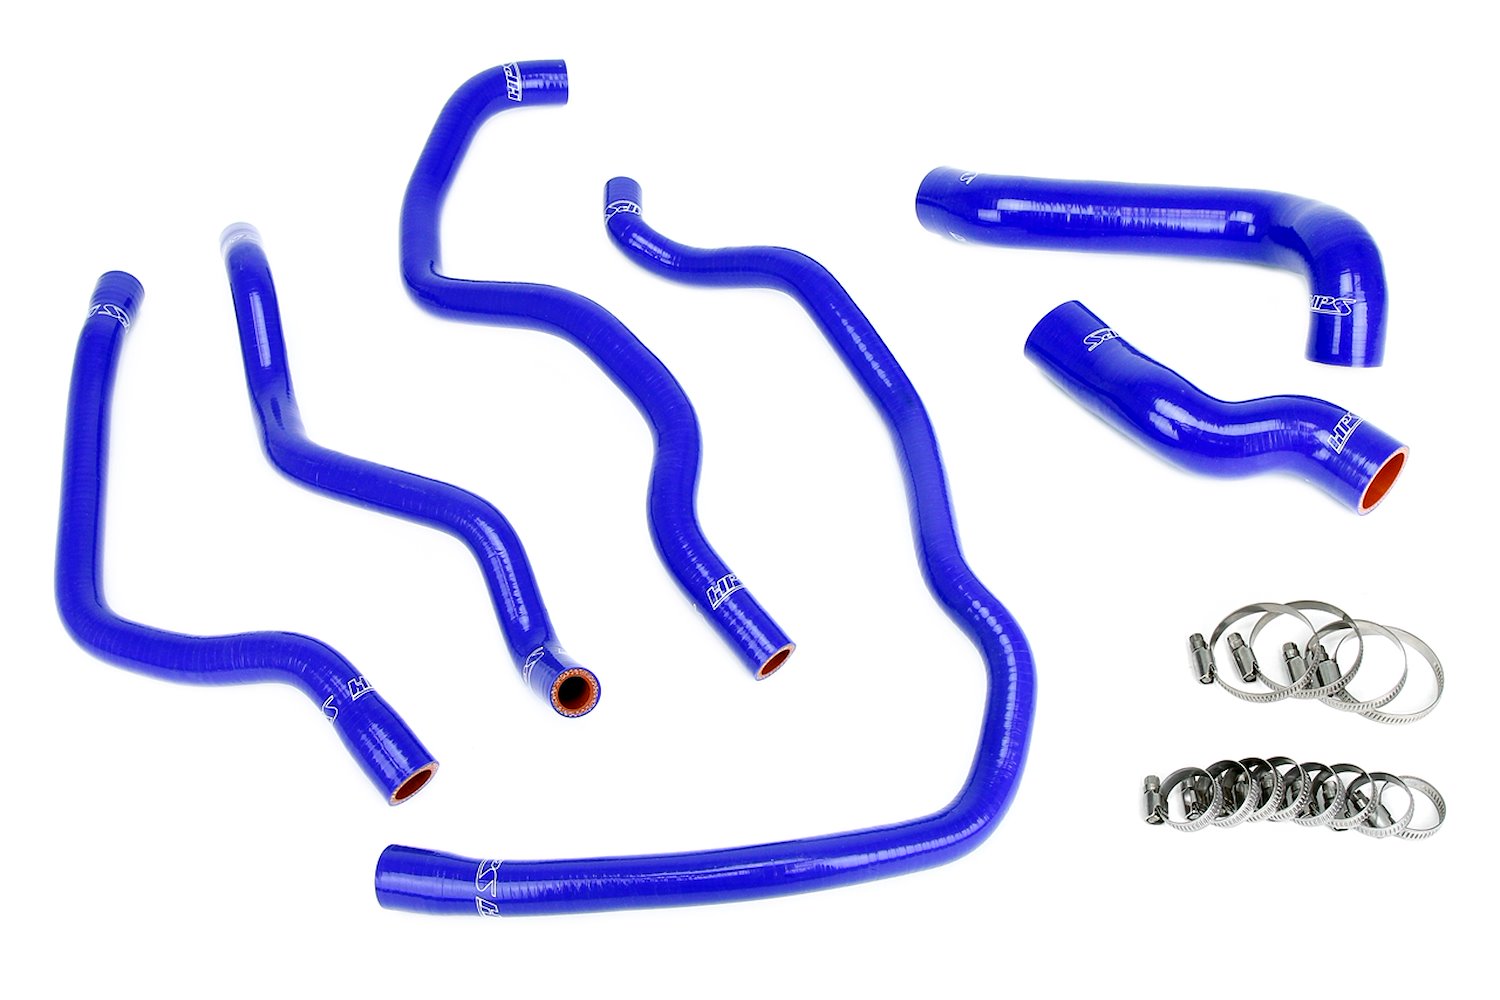 57-2076-BLUE Radiator and Heater Hose Kit, 3-Ply Reinforced Silicone, Replaces Rubber Radiator & Heater Hoses